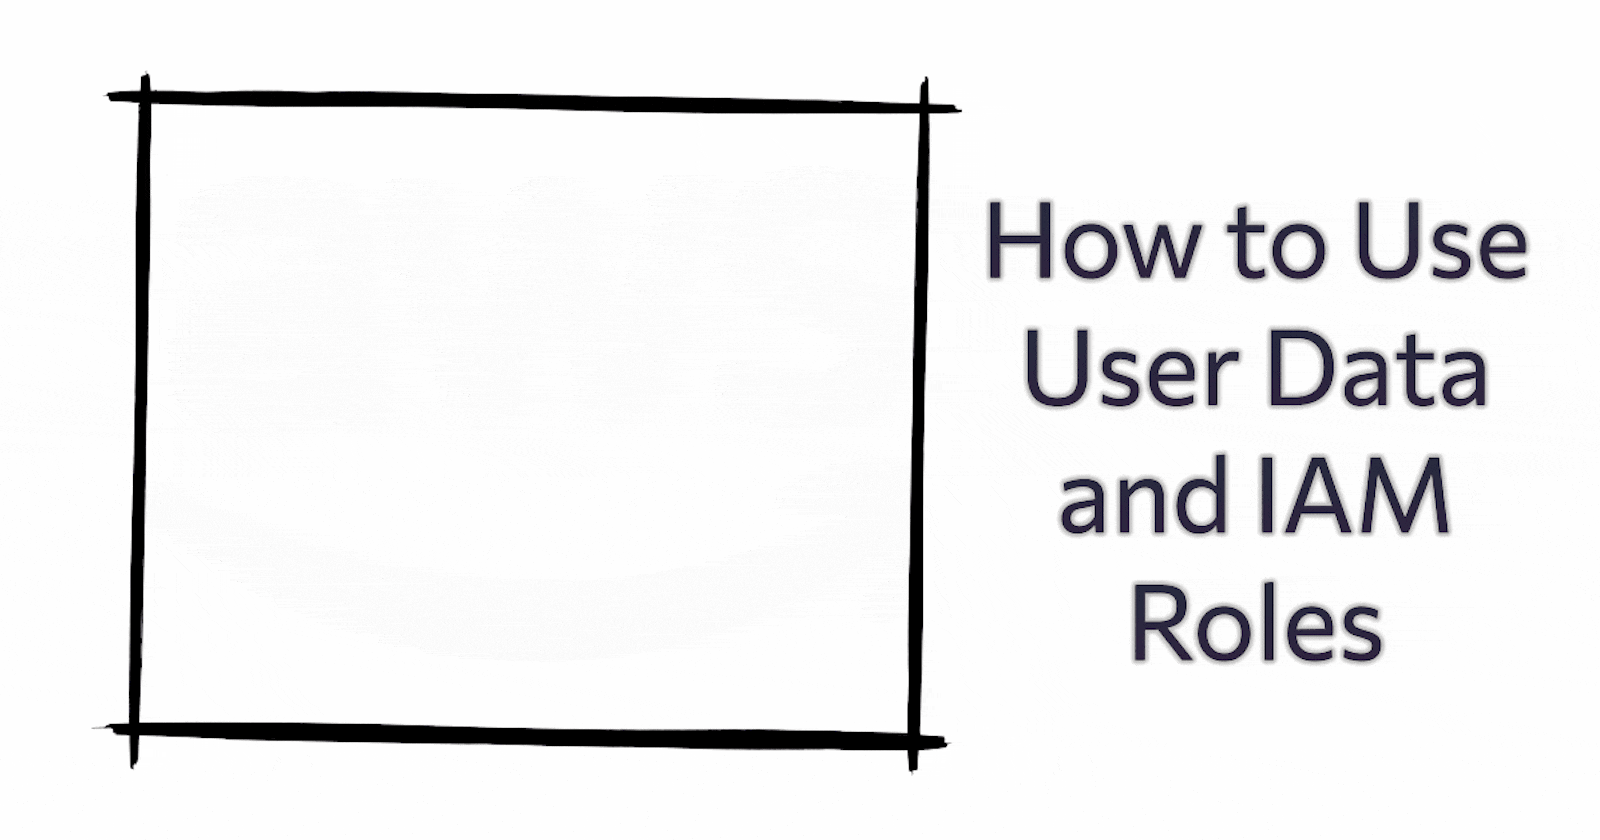 AWS Basics for DevOps Learners: How to Use User Data and IAM Roles